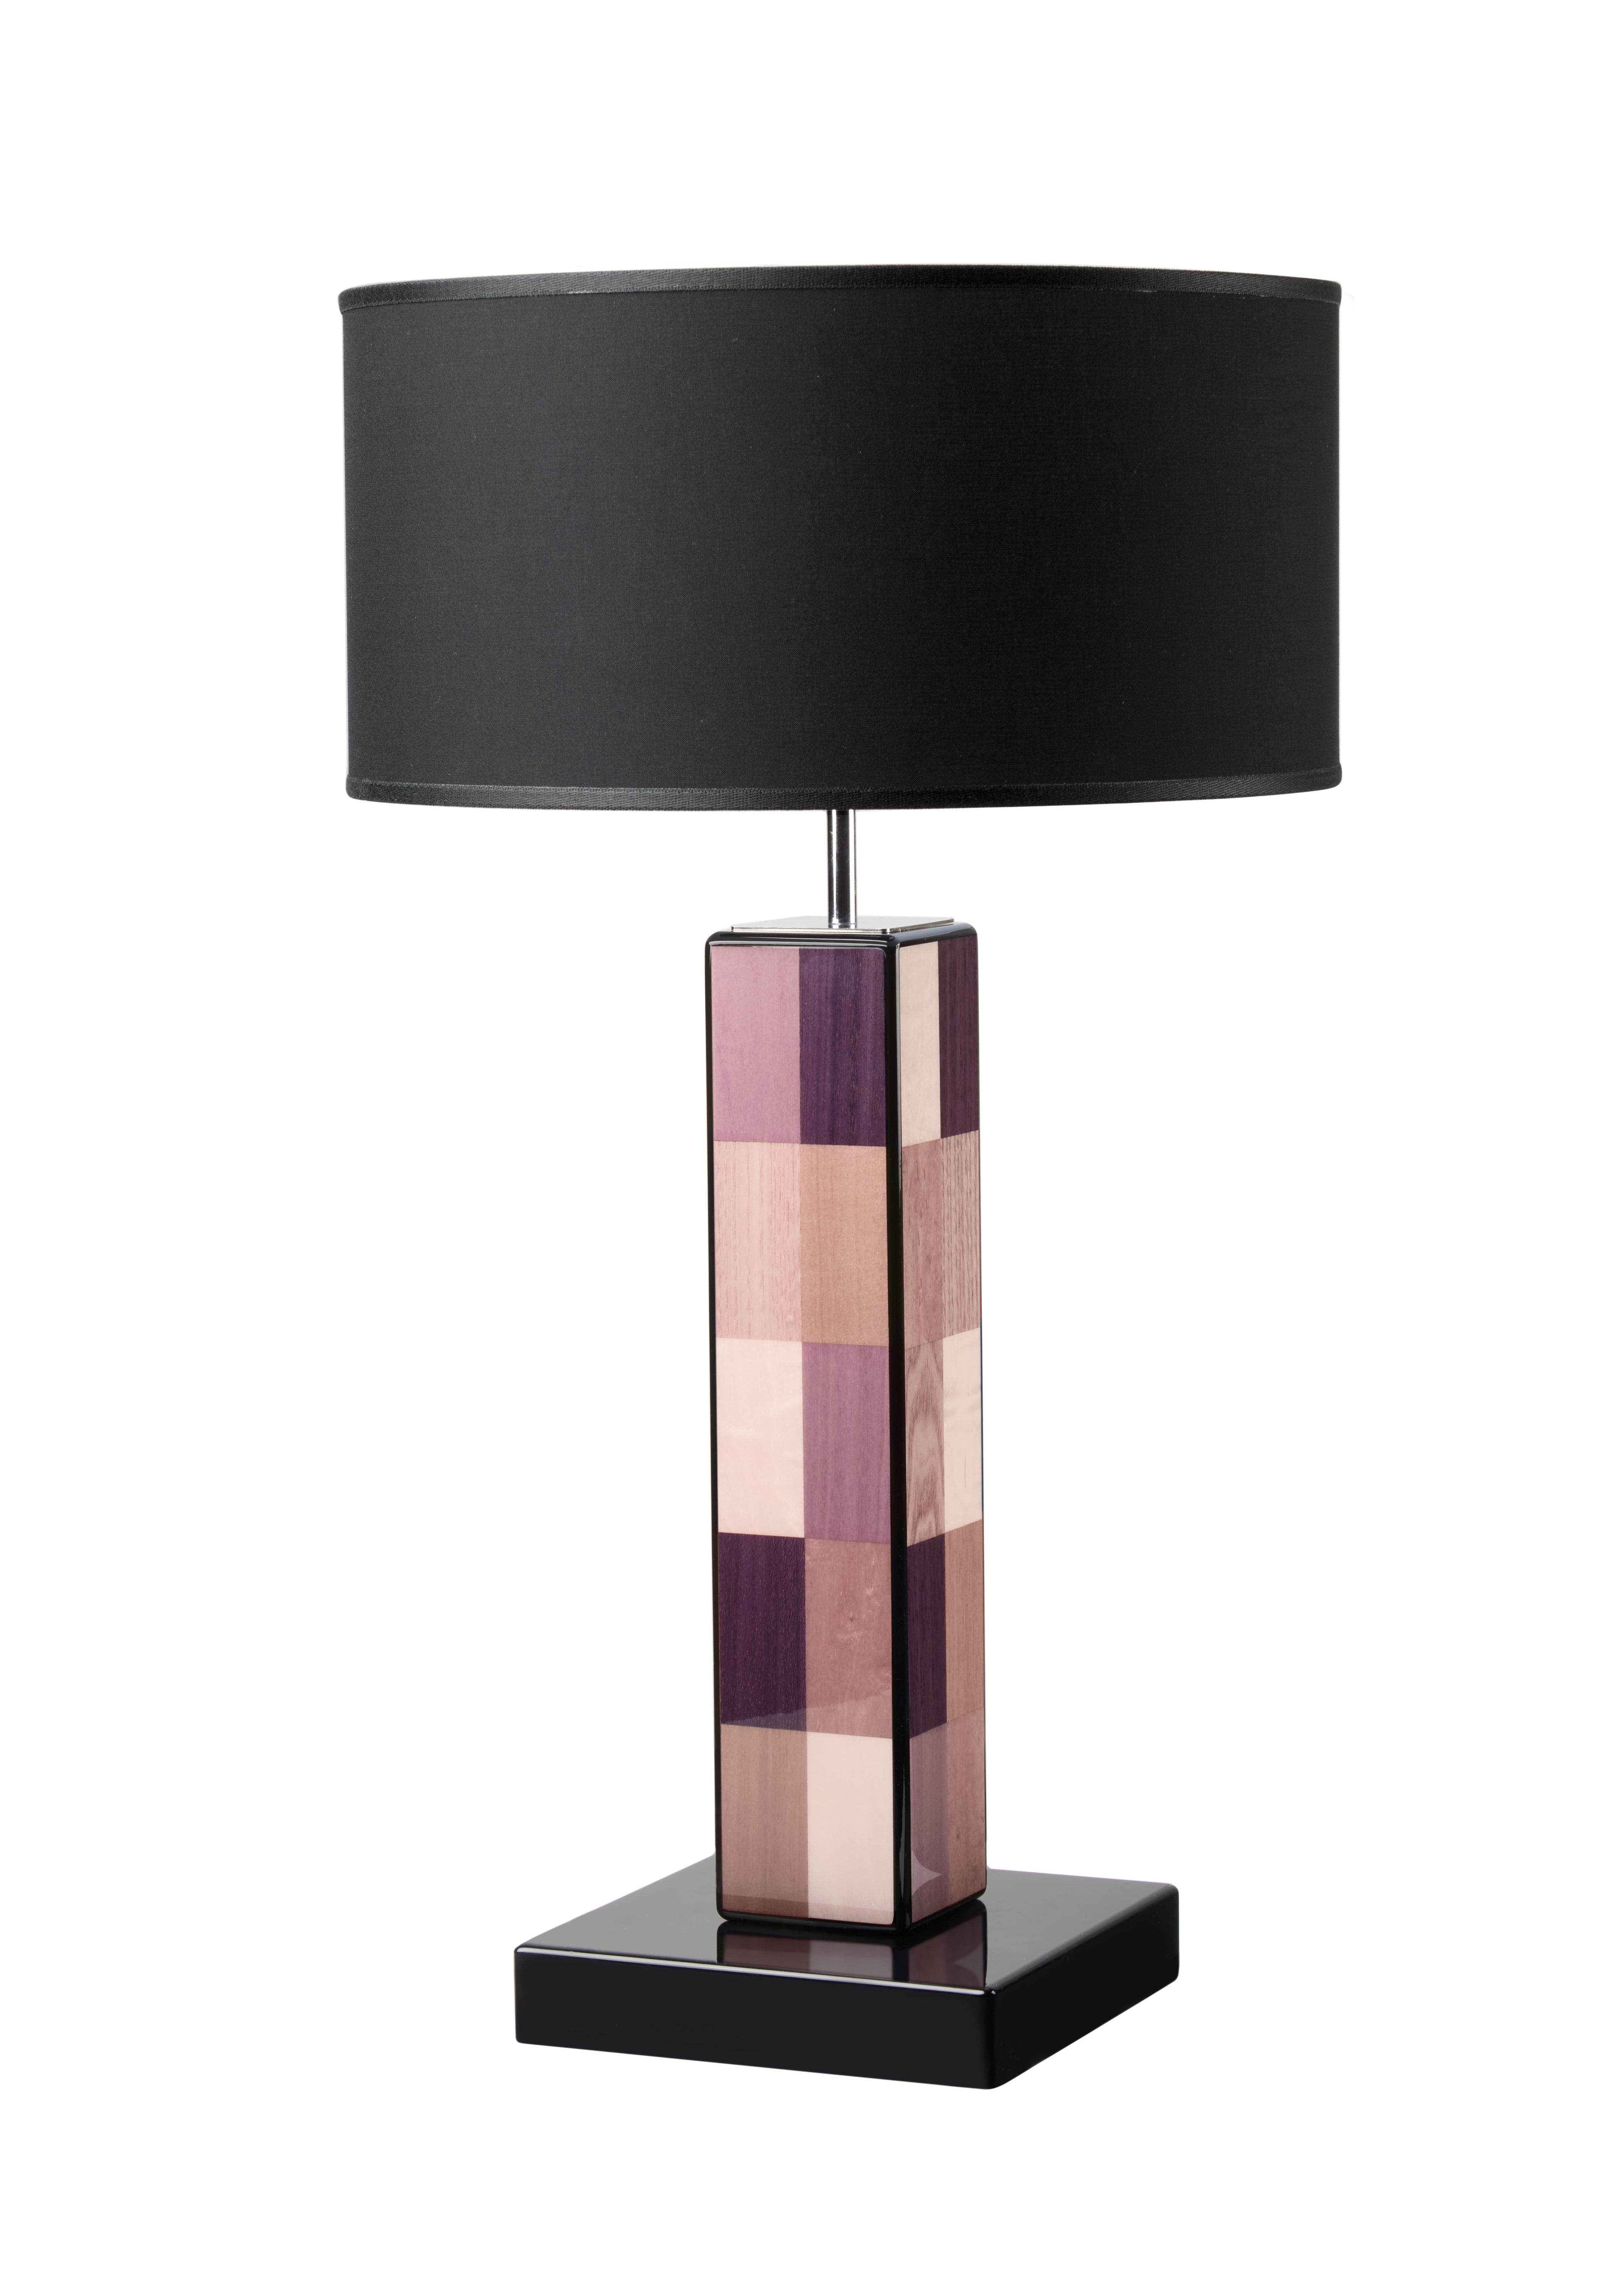 Clean and essential geometric lines define this spectacular table lamp, making it a stately piece of refined sophistication. Masterfully handcrafted, it is characterized by a handmade inlaid veneering with pastel pink, beige, and brown rectangles